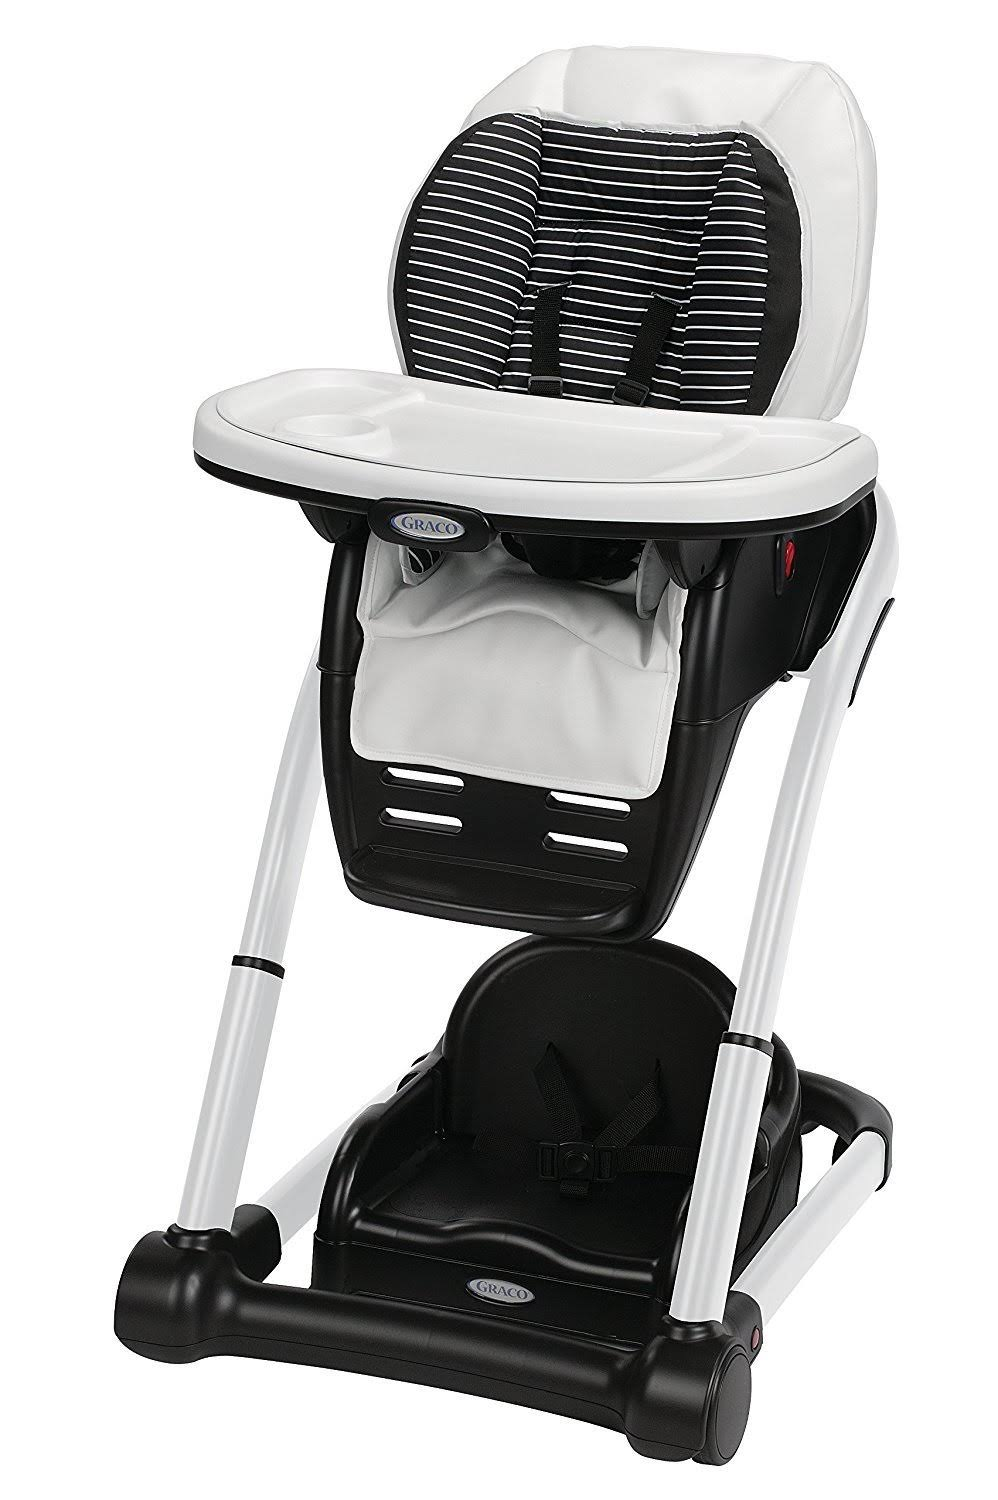 Graco Blossom 4-in-1 Convertible High Chair Seating System  C Studio